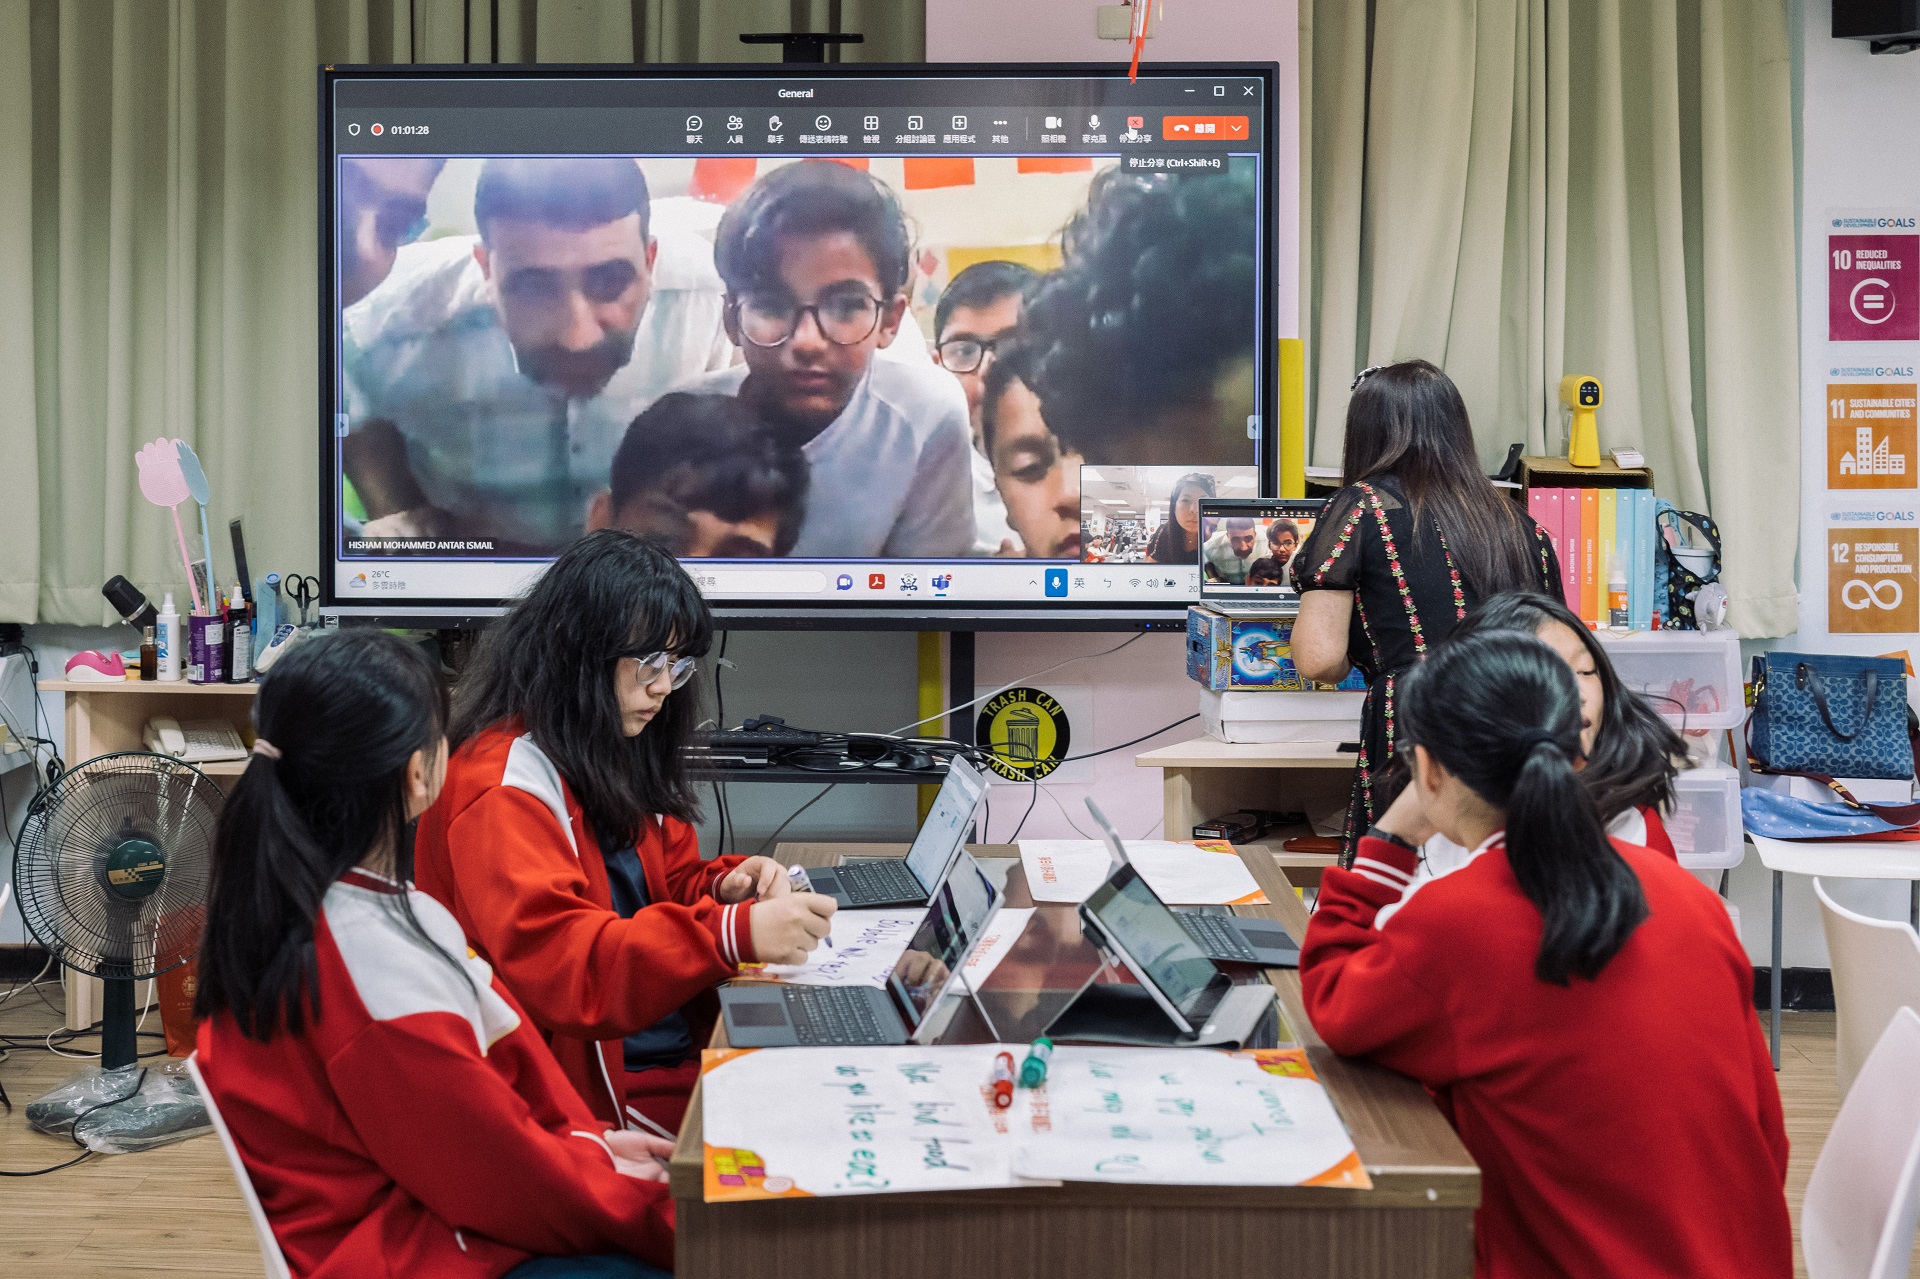 Students in a classroom interact virtually with other students visible on a screen.